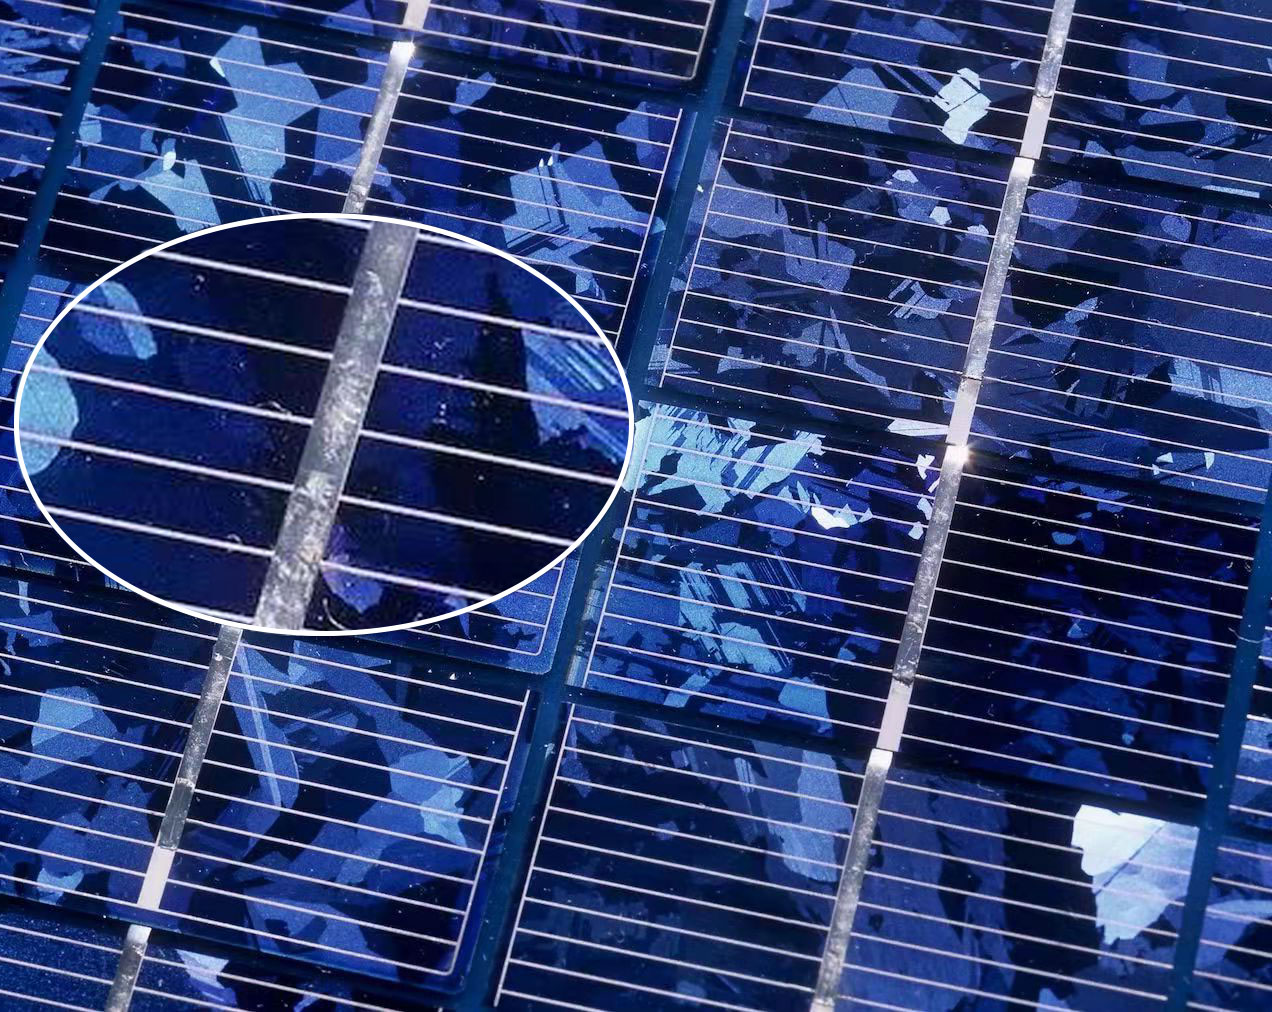 The impact of photovoltaic ribbon on modules